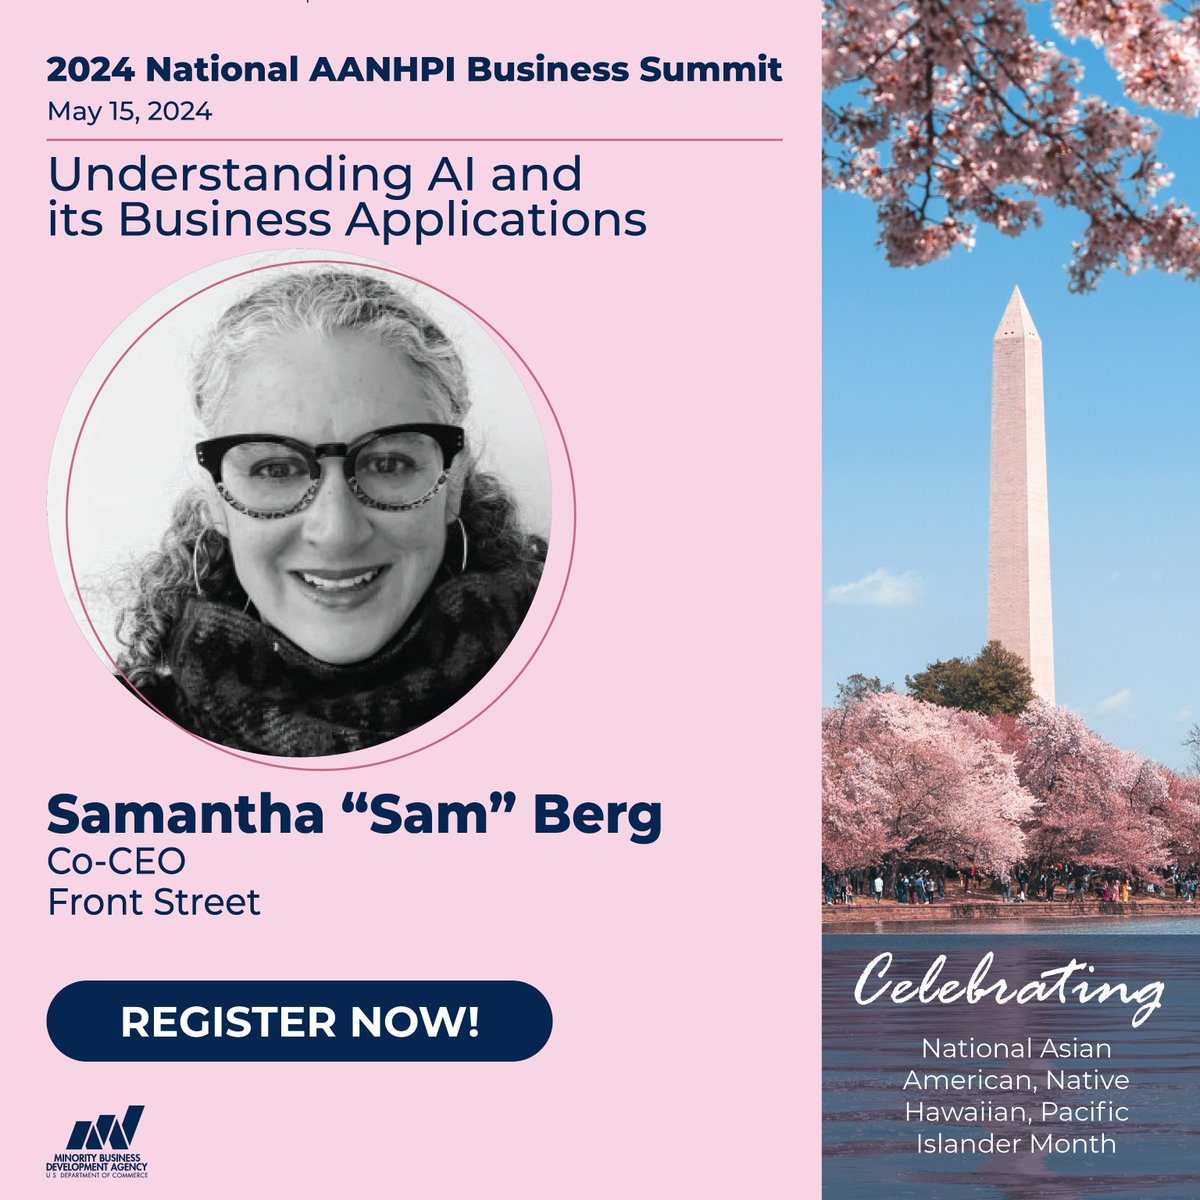 Join MBDA for its “Understanding AI and its Business Applications' session at the 2024 National AANHPI Business Summit, where expert speakers will share insights on the potential contributions of AI to the world of business. Stay up to date by visiting ow.ly/mNOQ50R4gzc.